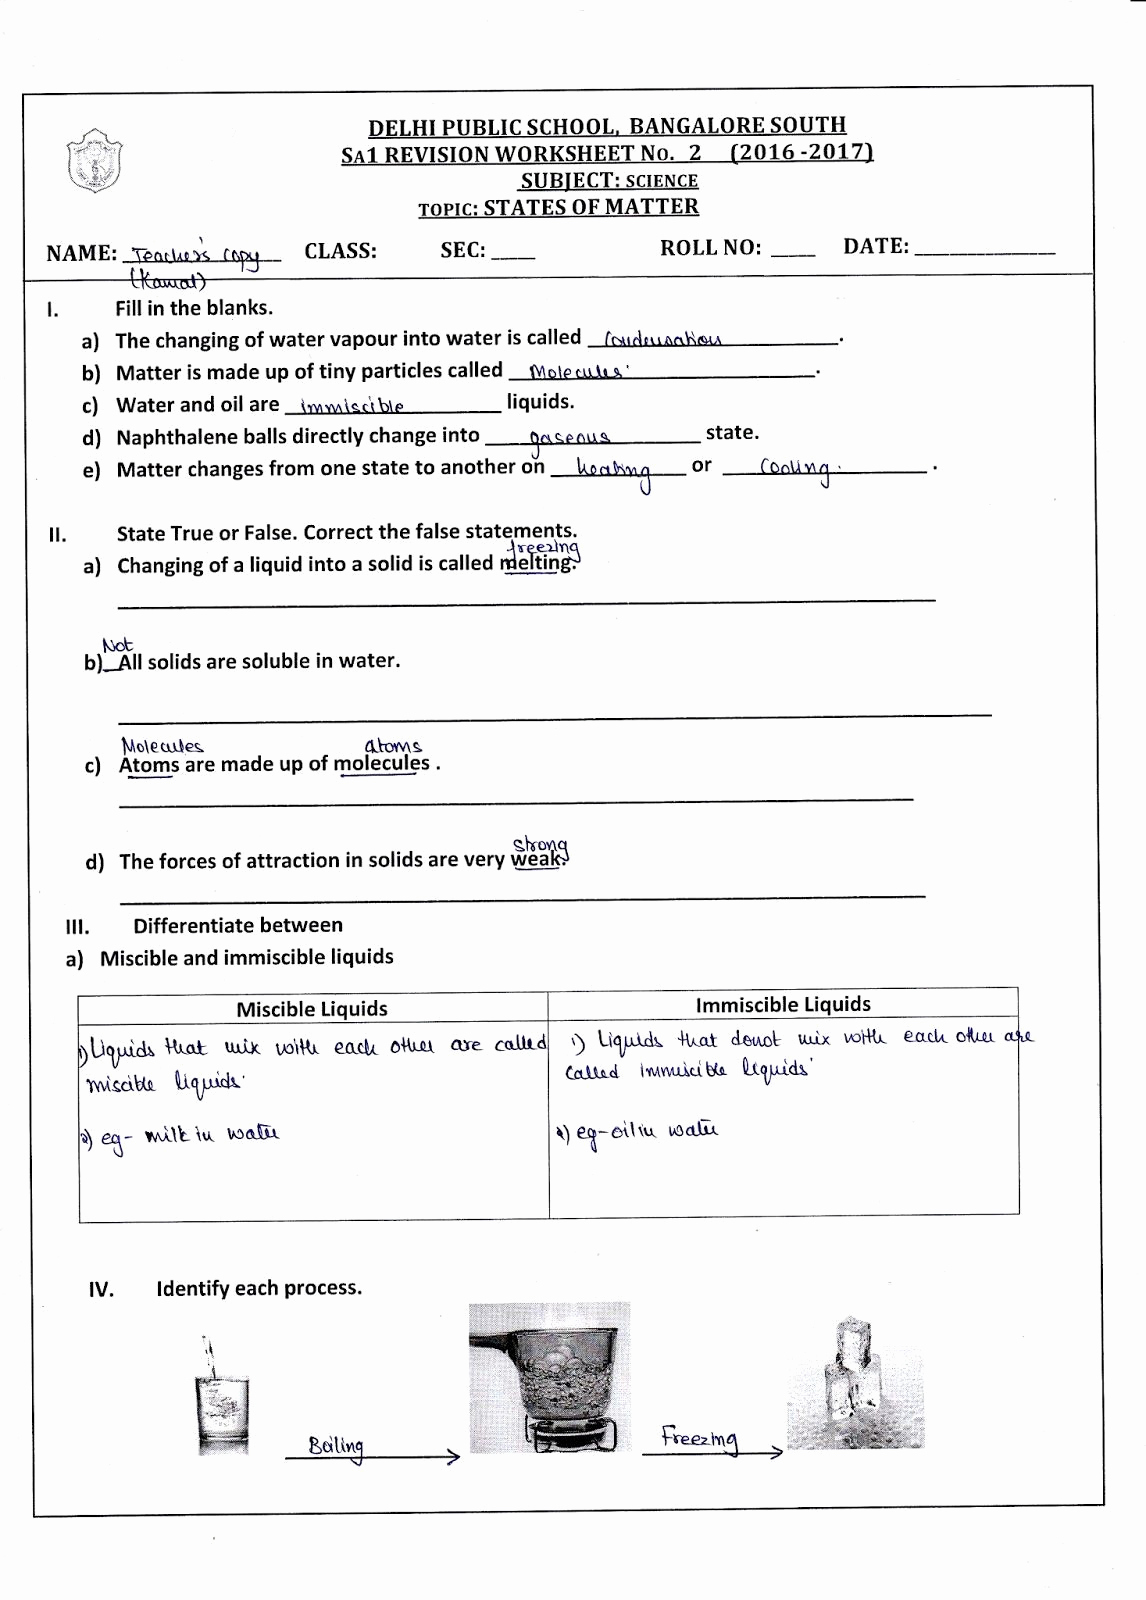 Free 8th Grade Science Worksheets Unique 20 Science Worksheets for 8th Grade